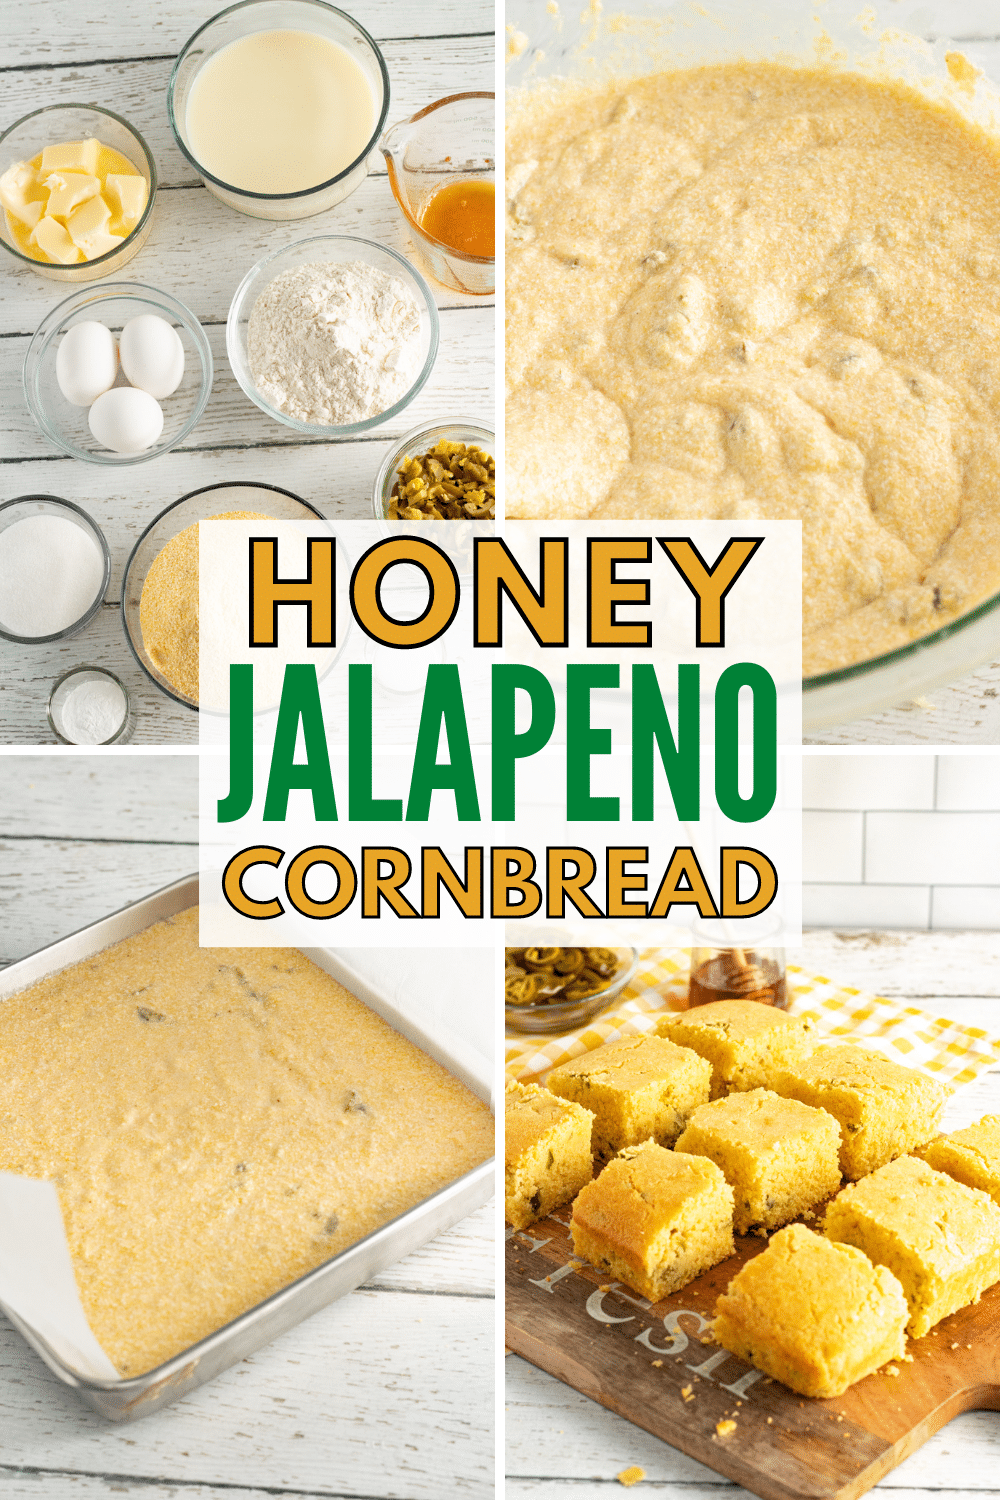 This Honey Jalapeno Mexican Cornbread Recipe is a fast and simple recipe that you can easily make at home! Delicious homemade cornbread. #mexicancornbread #cornbread #honey #jalapeno #recipe via @wondermomwannab